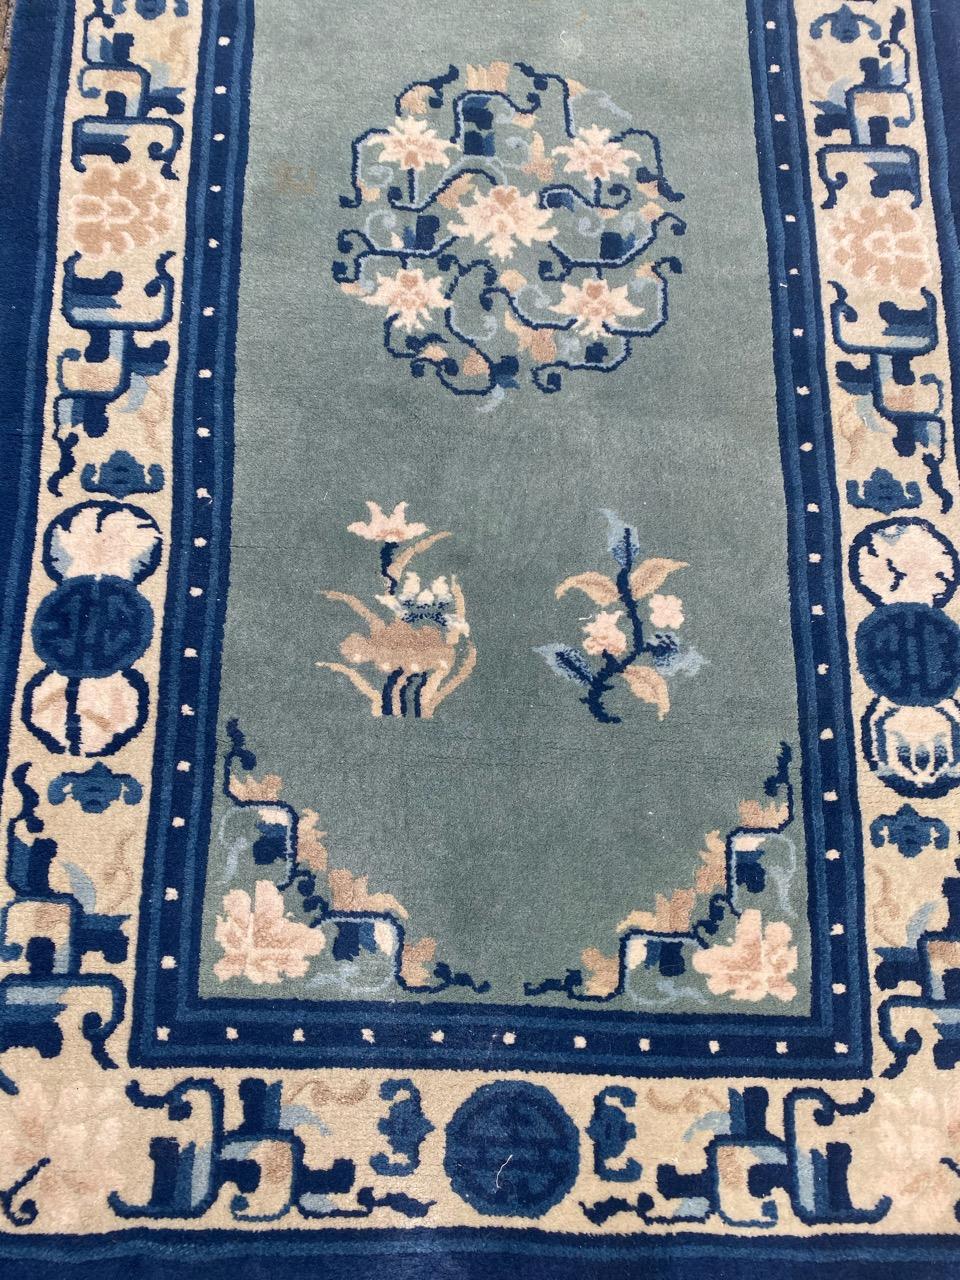 Wonderful mid century pair of Chinese Beijing rugs with nice Chinese design and beautiful colors with blue field, entirely hand knotted with wool velvet on cotton foundation
Measure for each rug is: 72 x 142 cm.